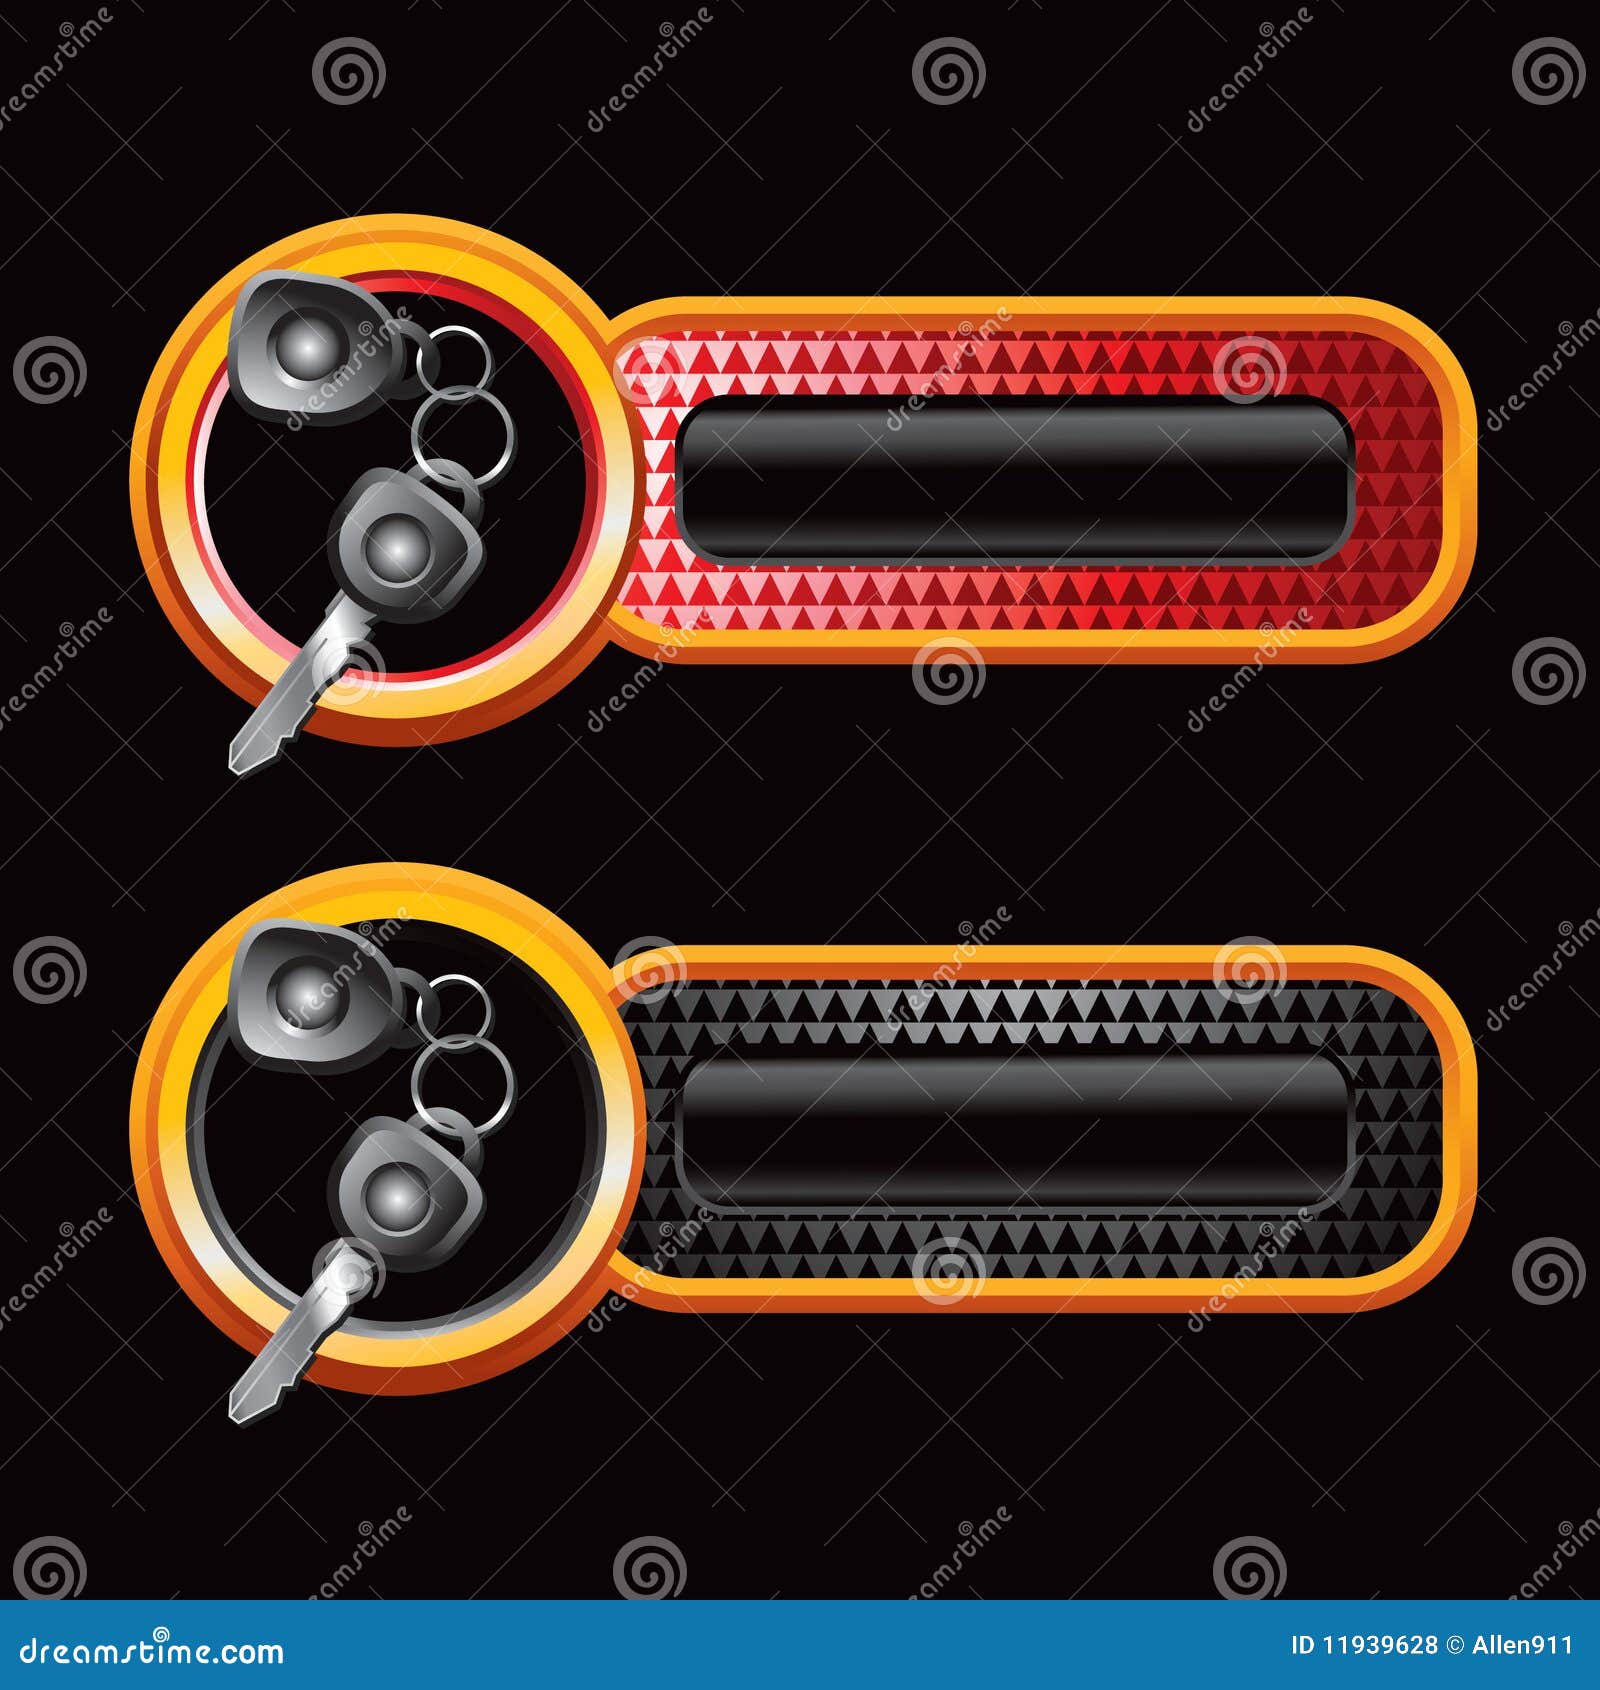 car-keys-on-checkered-banners-stock-vector-illustration-of-entry